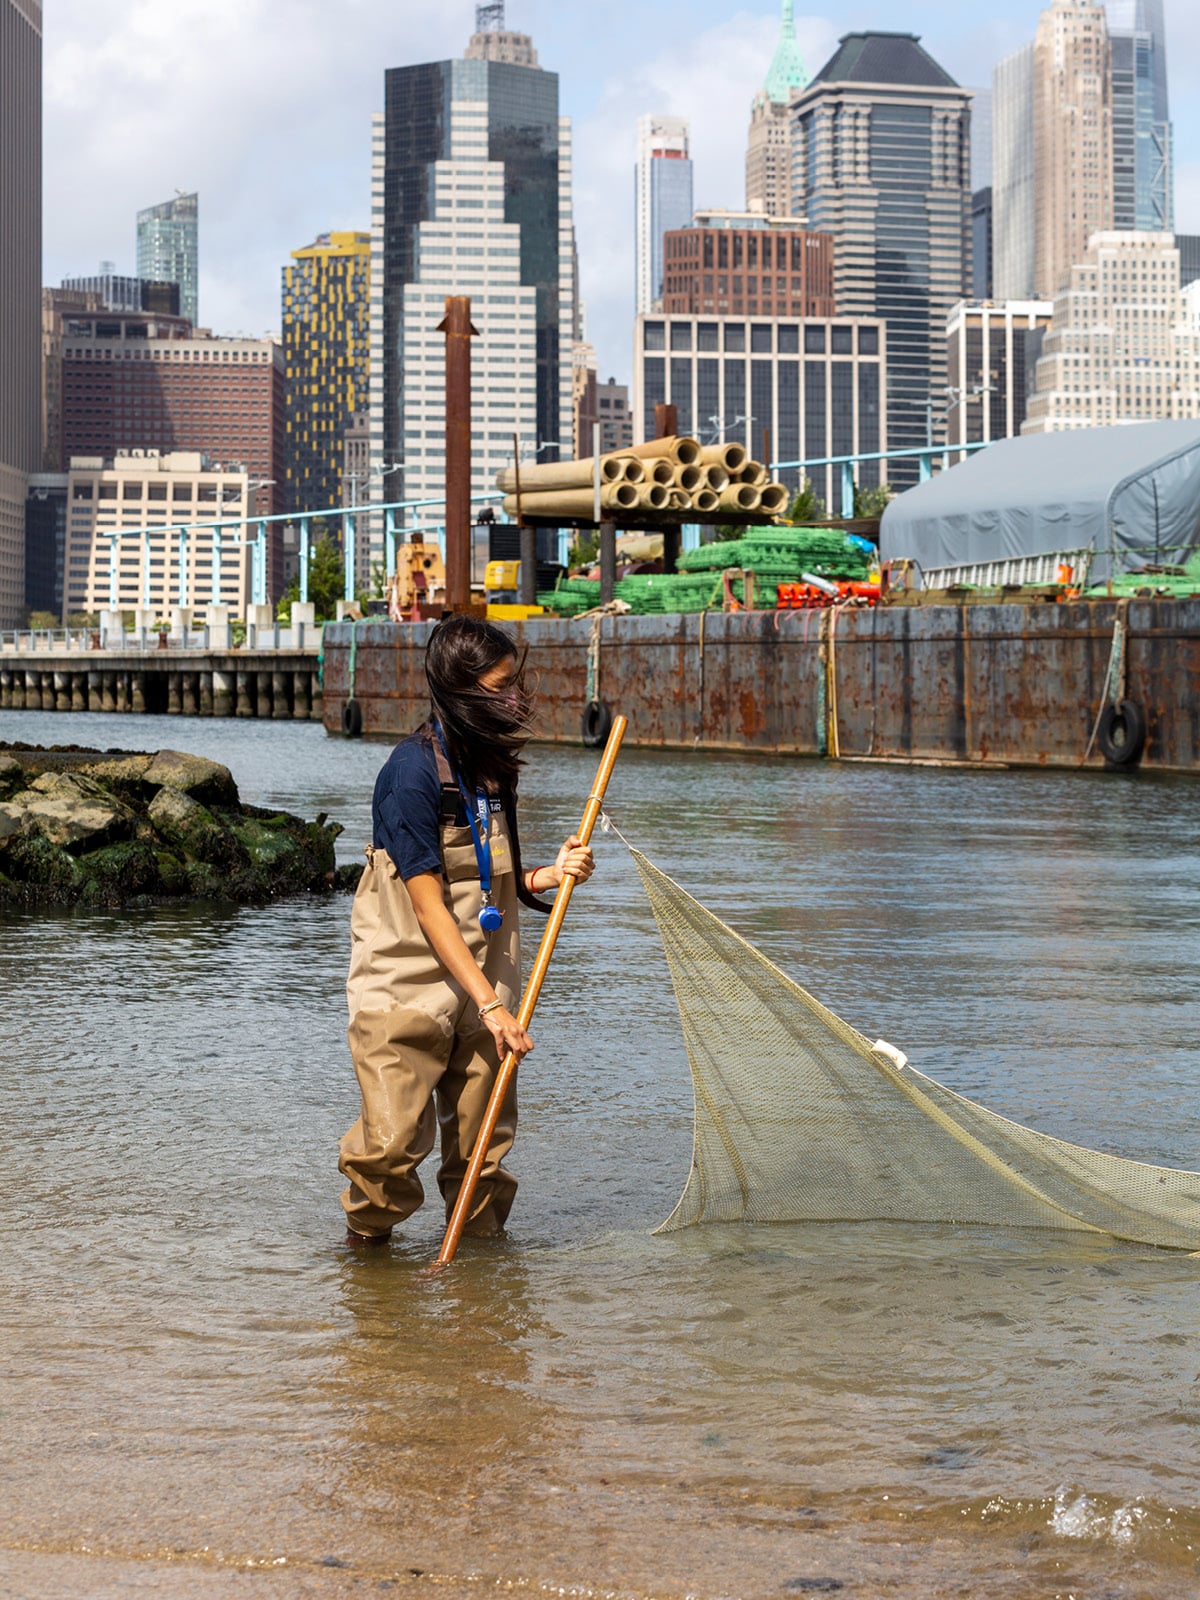 Woman in fishing waders placing seine fishing net in the water on a sunny day. Construction barge and lower Manhattan are seen in the background.